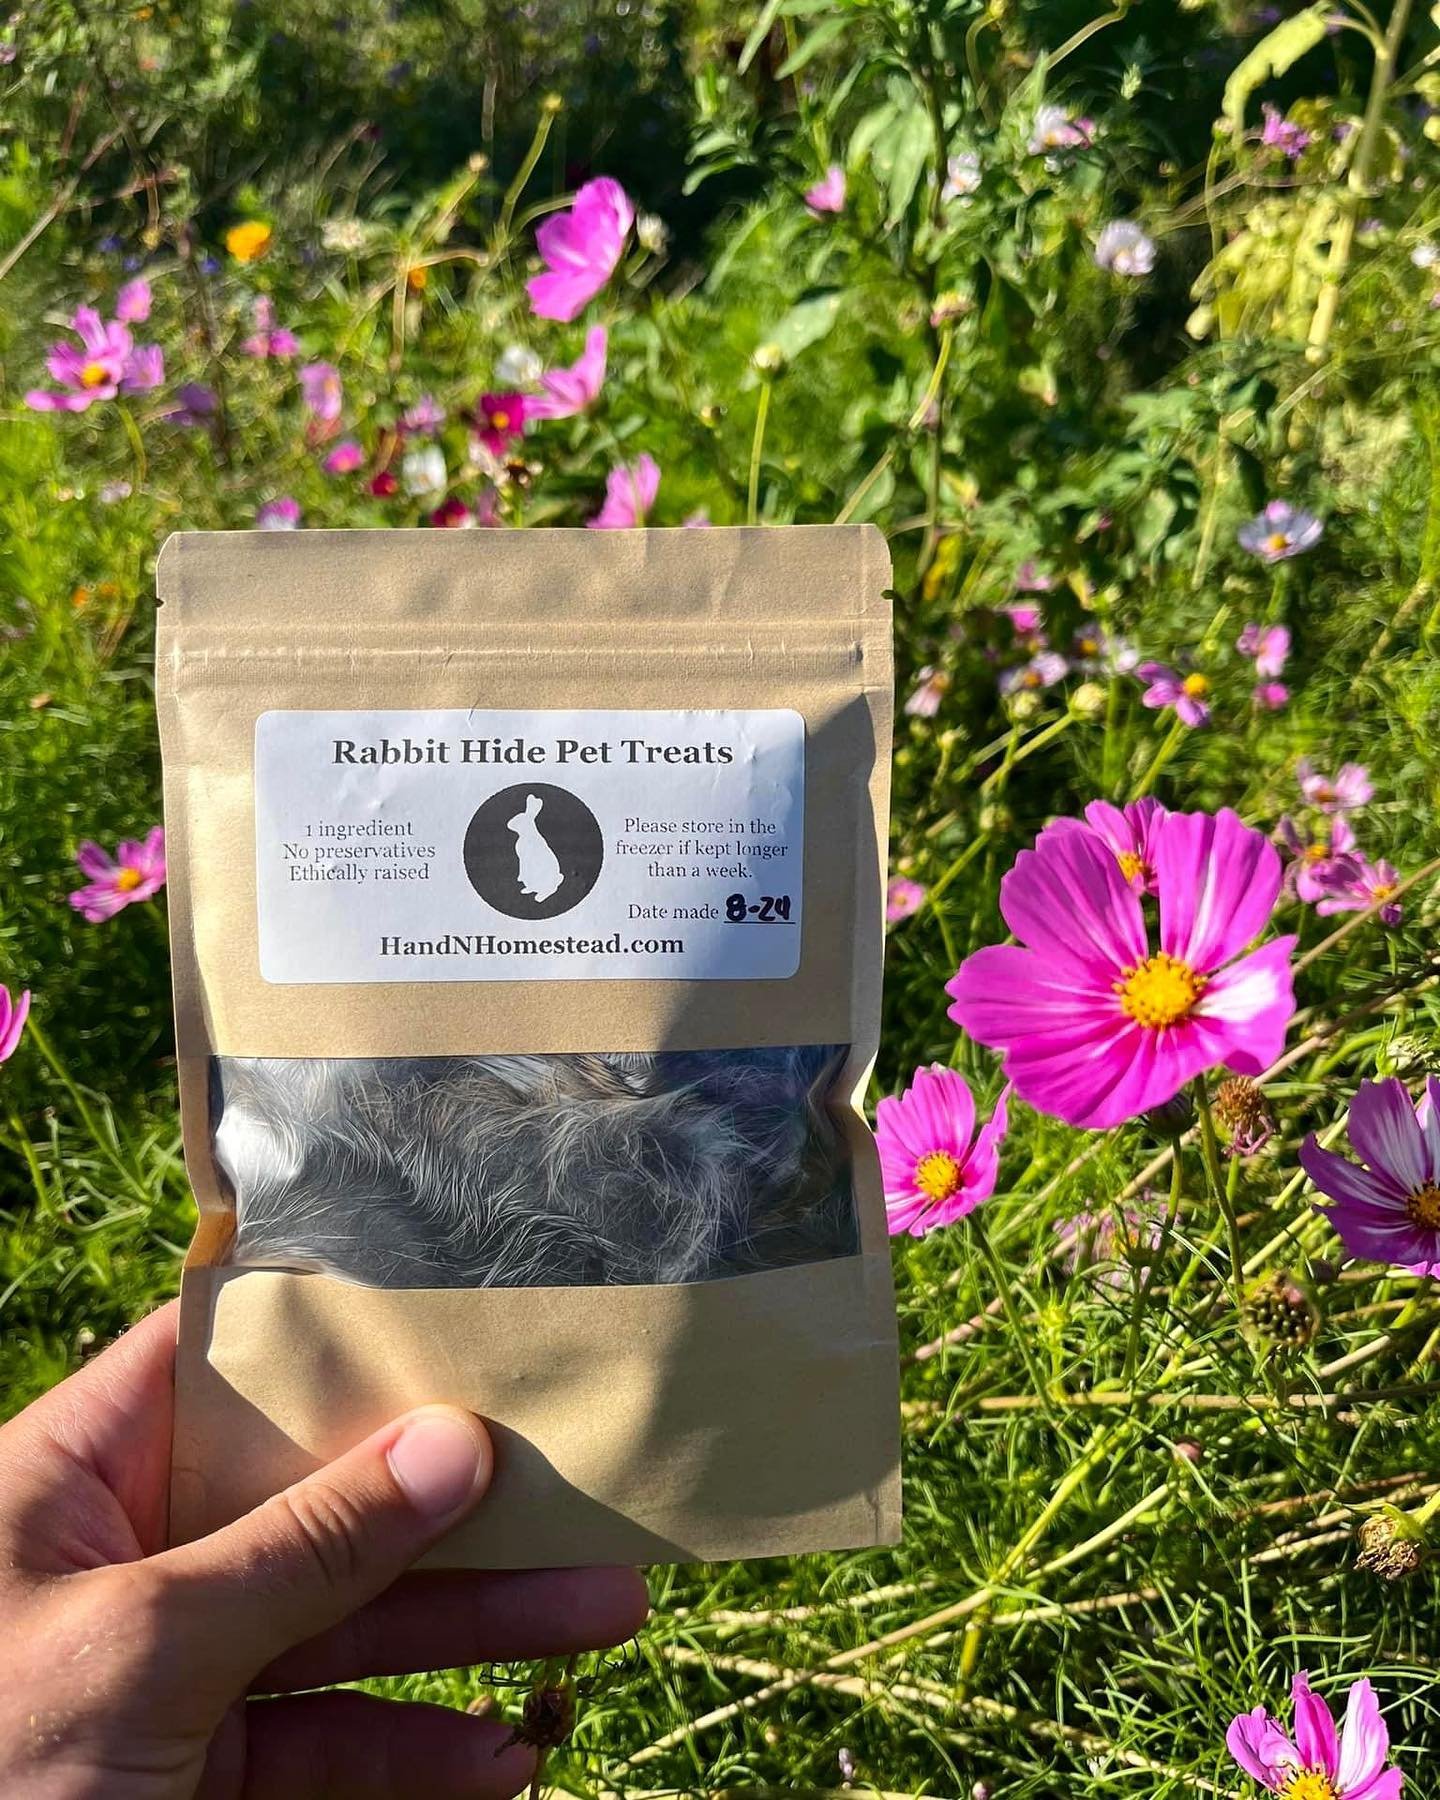 The days are getting longer which means more time outside with the dogs! 🌸 ⁣
Make sure you&rsquo;re rewarding their good behavior with natural, single ingredient treats! ⁣
⁣
#shopsmallbusiness #dogtreats #happydogs #dogtraining #rawfeeding #rawfeddo